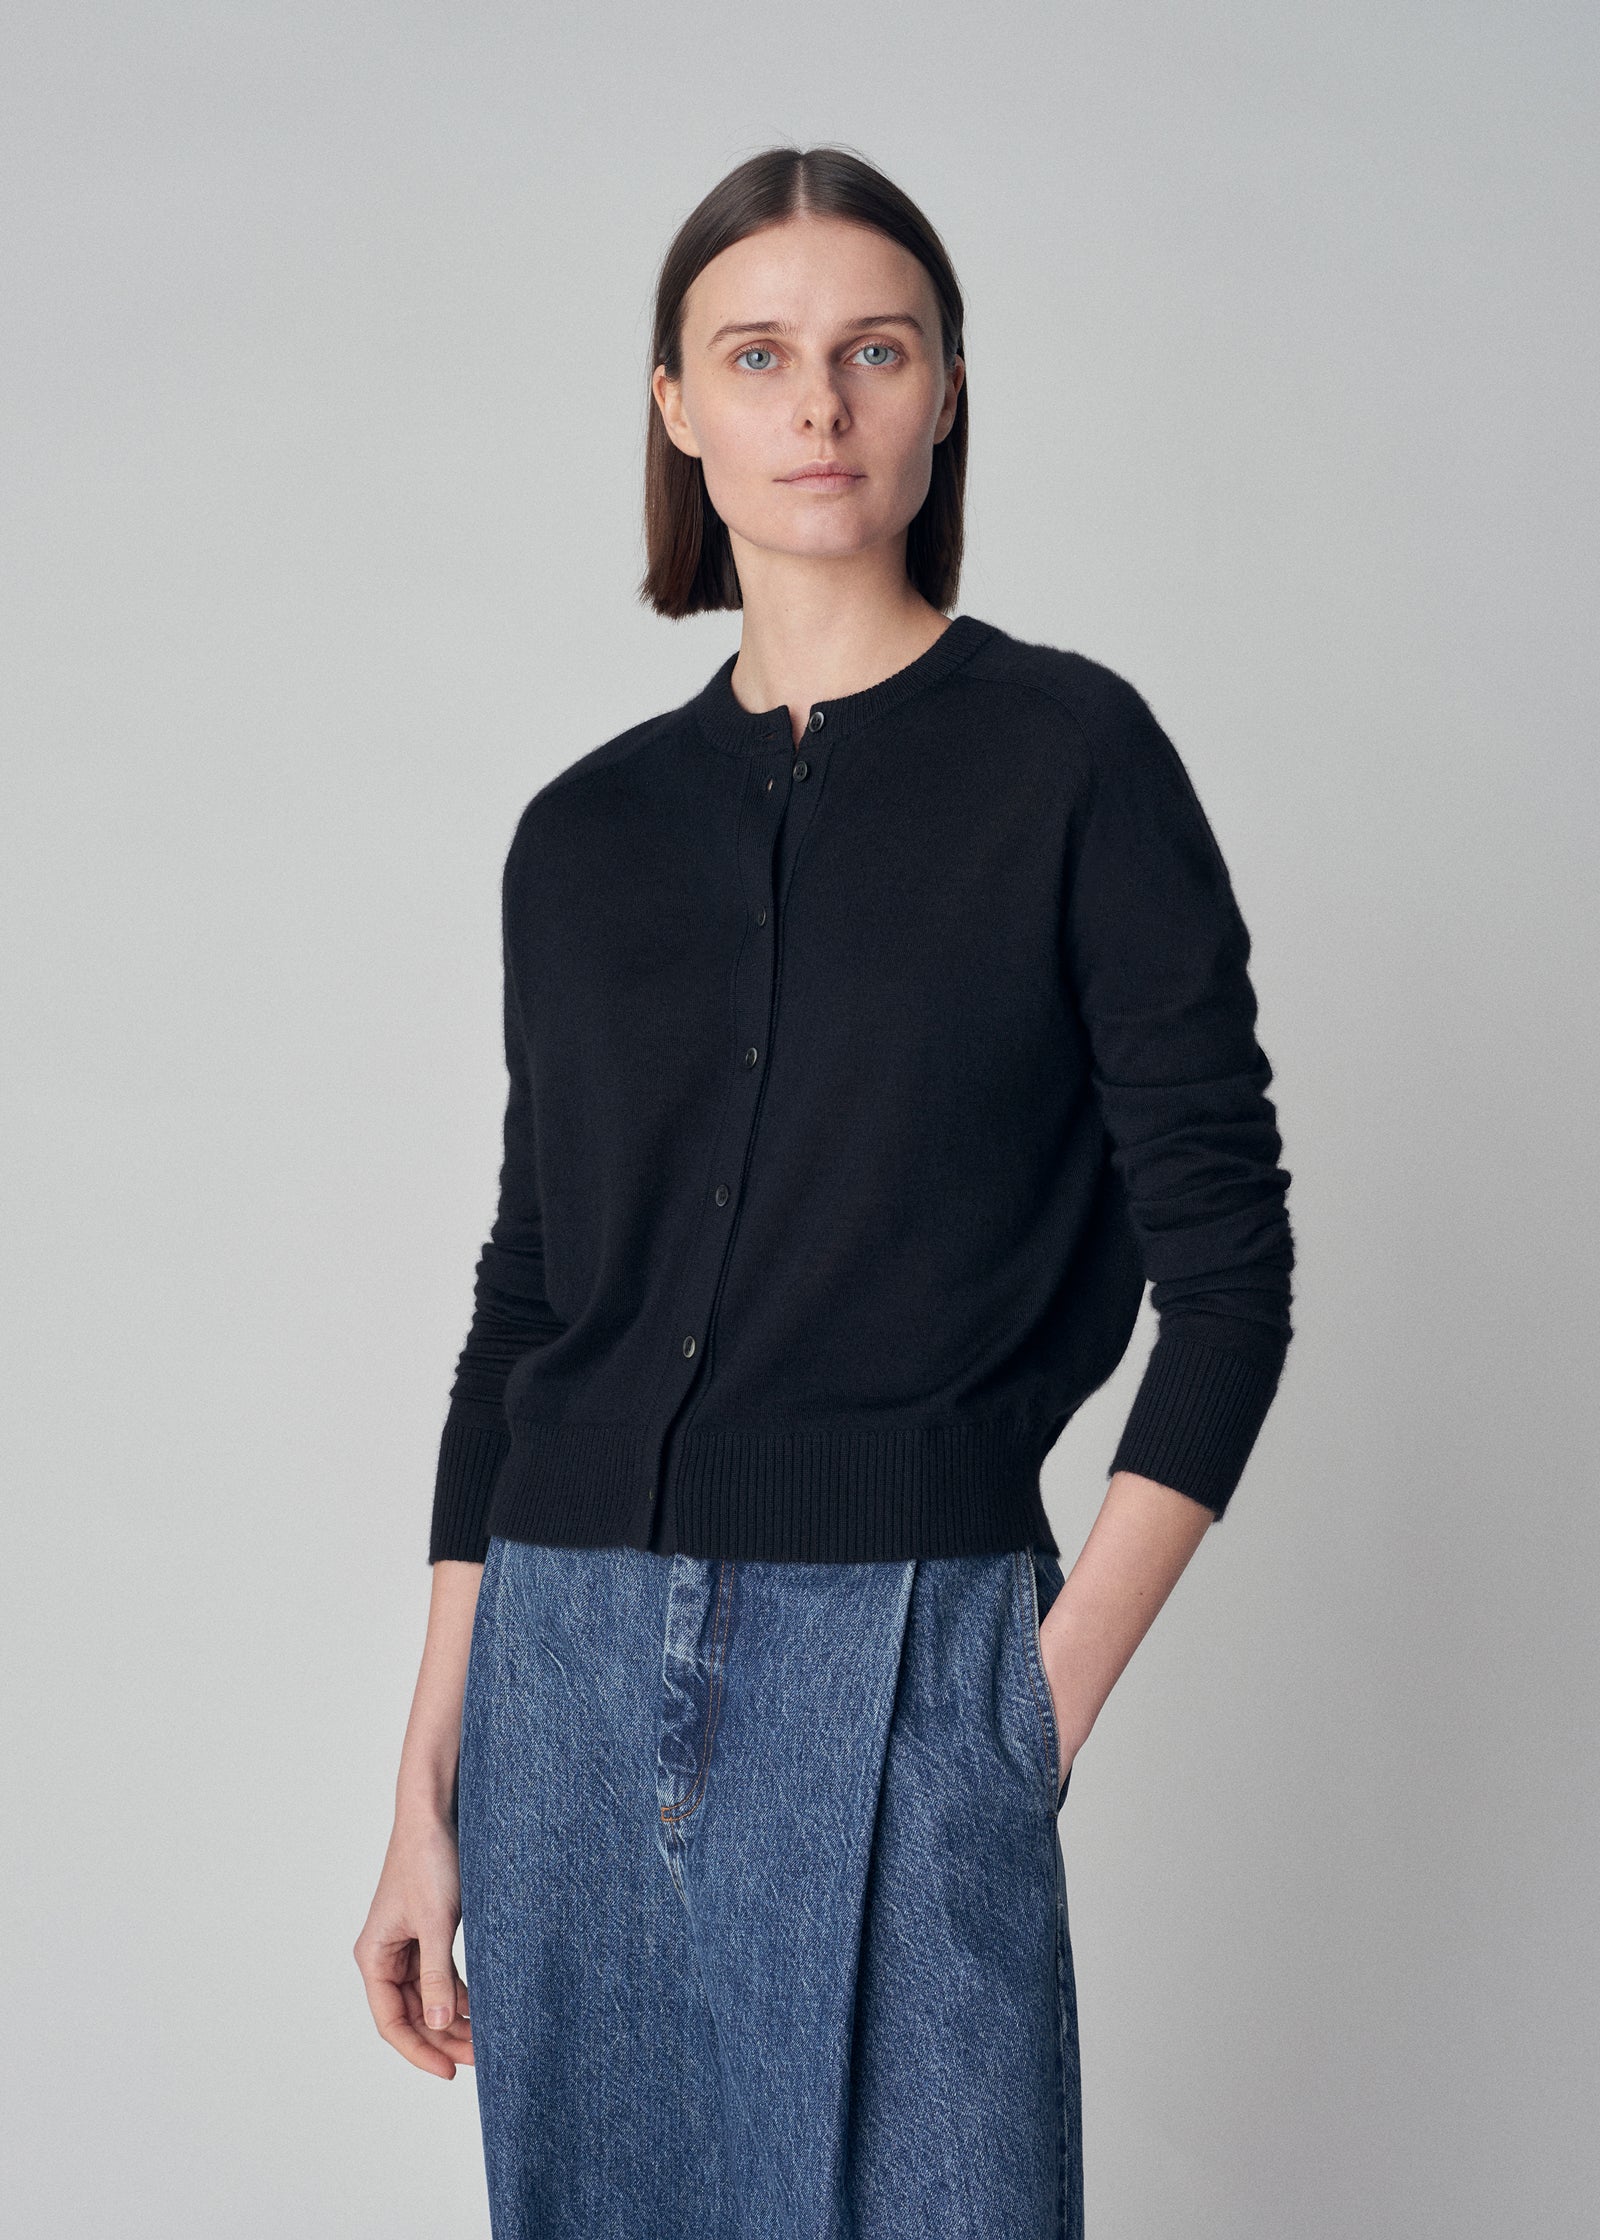 Waist Length Cardigan in Fine Cashmere  - Black - CO Collections